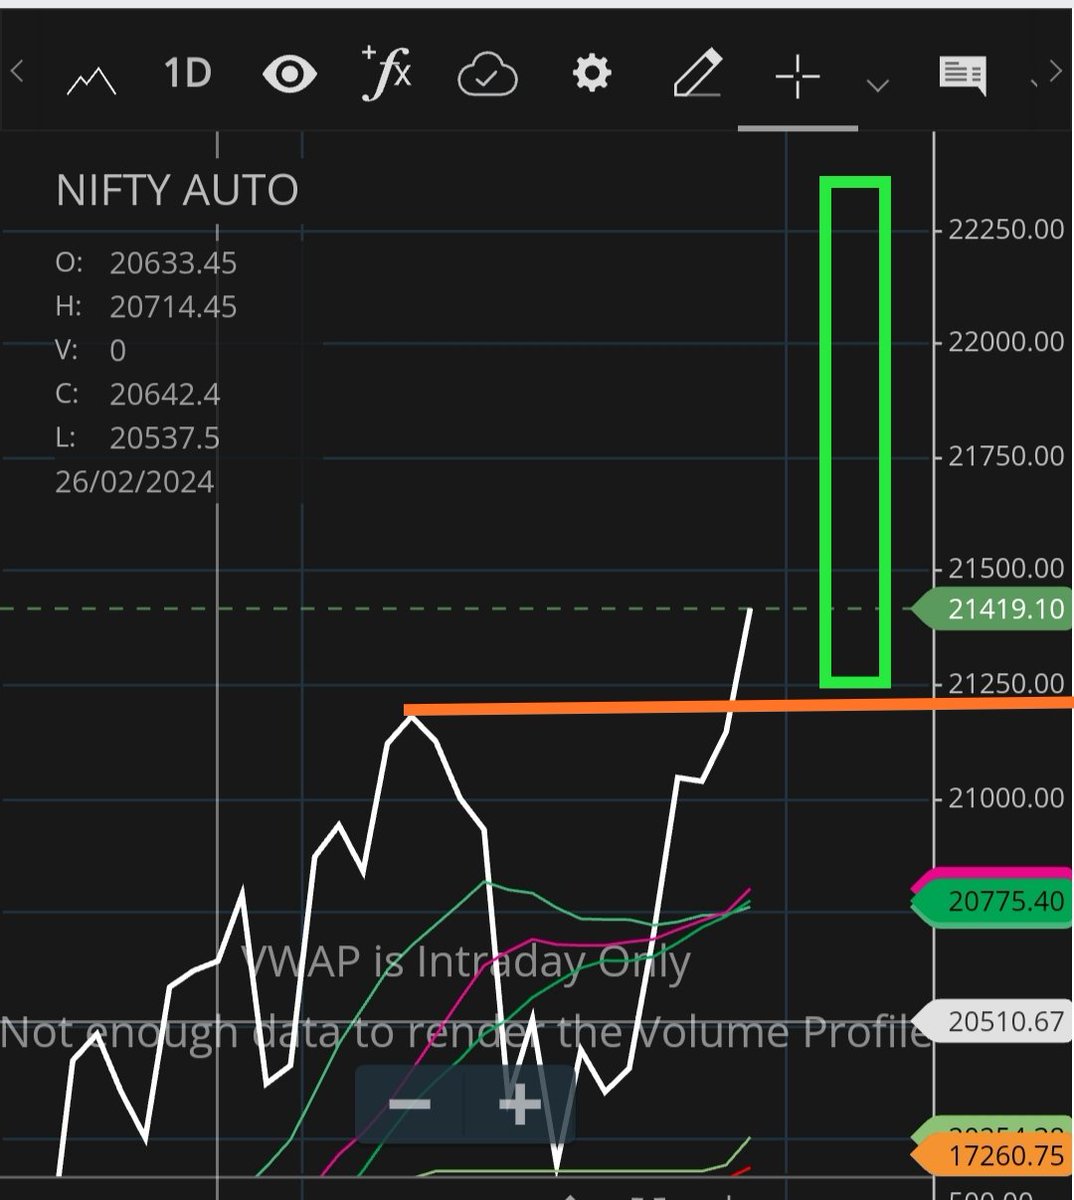 #Niftyauto 
Daily Rounding bottom break out 🔥
Daily & hourly Rsi&adx positive divergence 💥💥💥
CMP 21419 ...keep csl 20991 ....t-1 ..22236 ....t-2 24091 🔥🔥🔥
#moneytree🌲
#Archer✍️✍️✍️❤️🖤